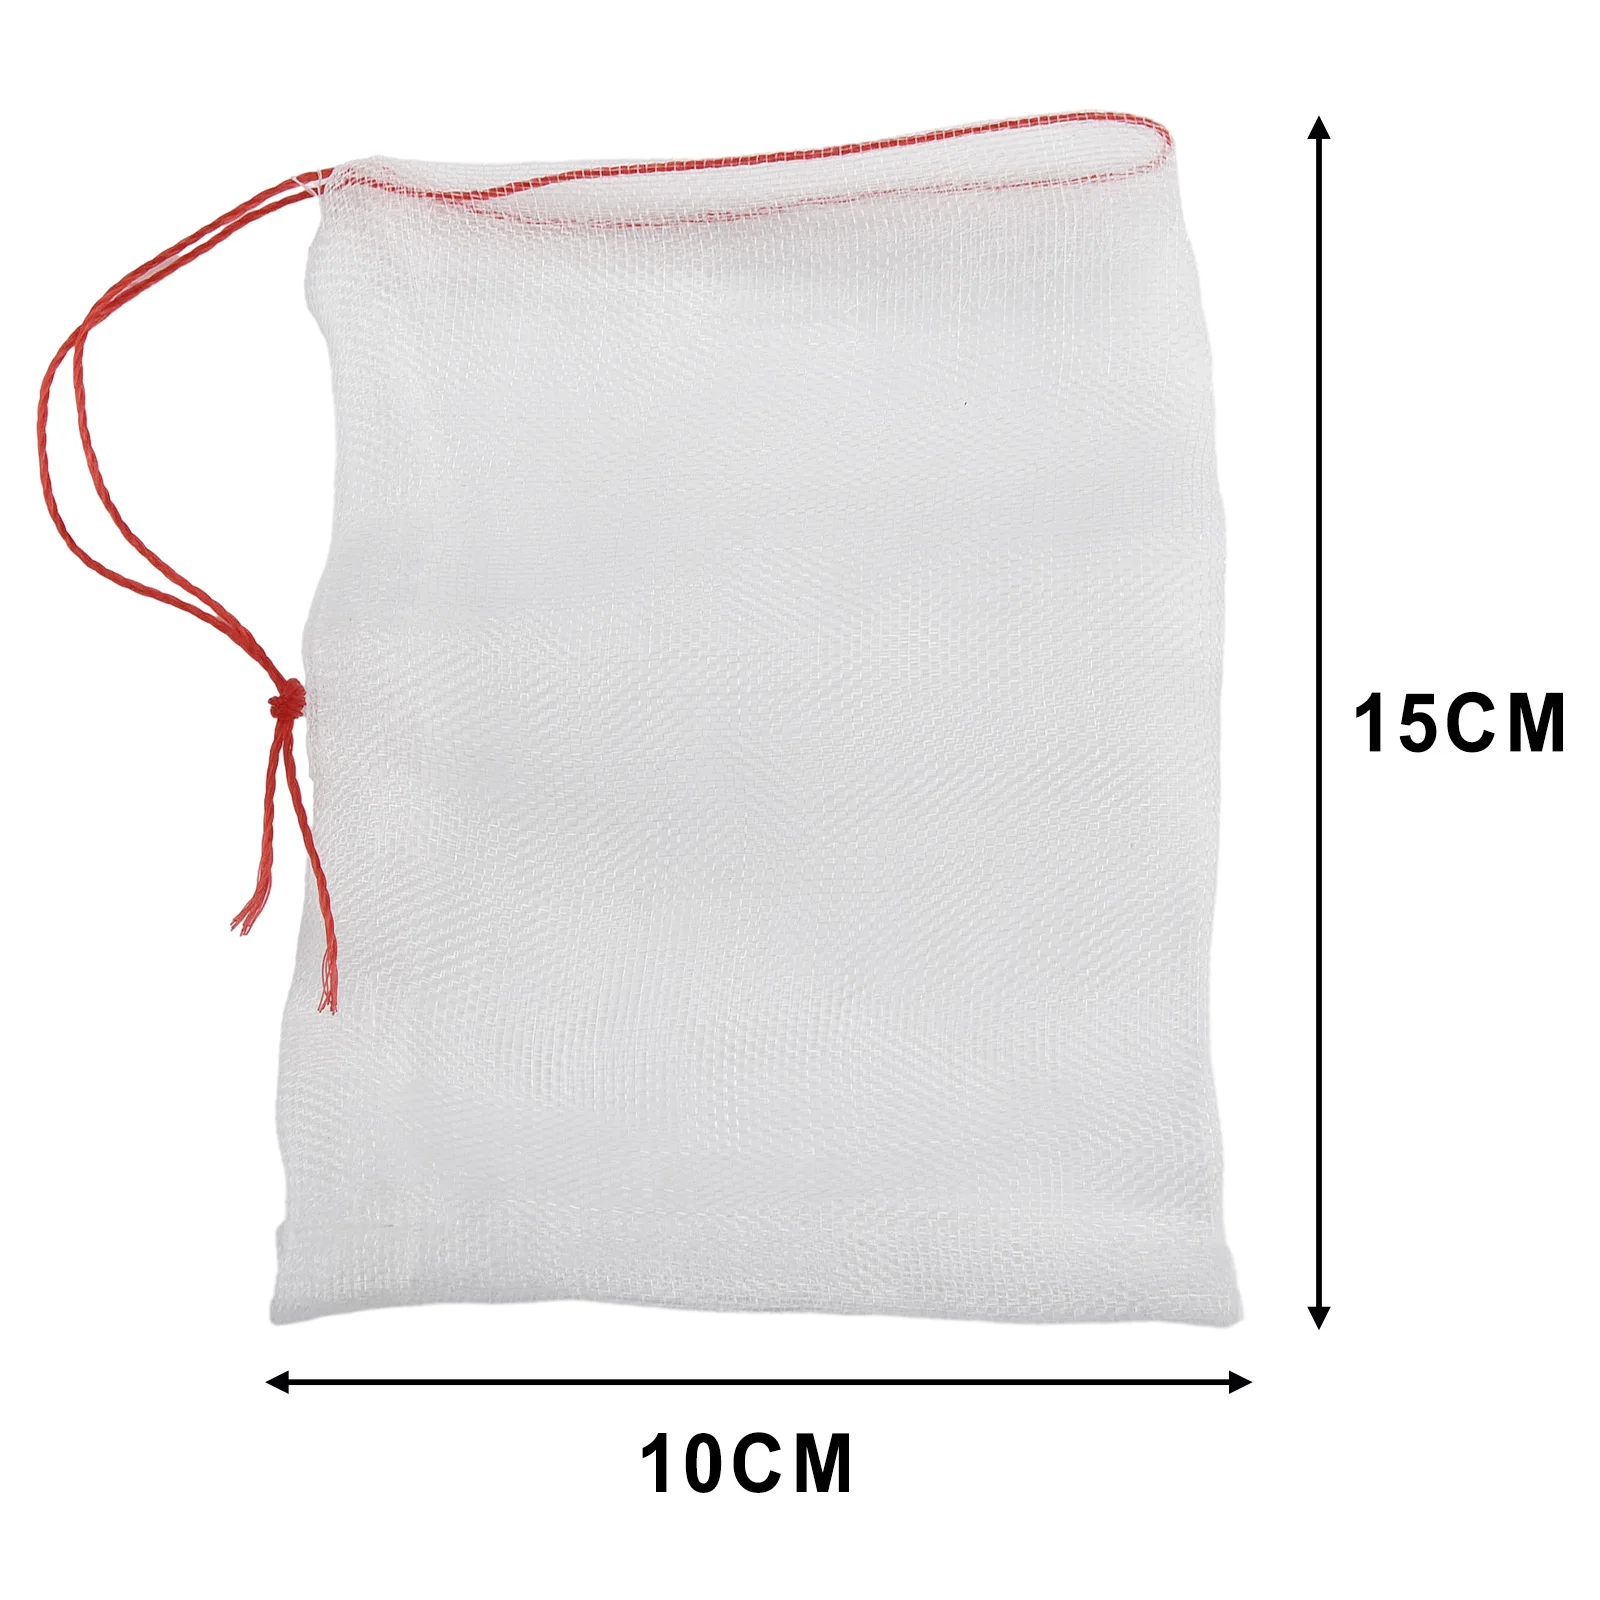 1pc Strawberry Grapes Fruit Grow Bags Netting Mesh Vegetable Plant Protection Bags For Pest Control Anti-Bird Garden Tools